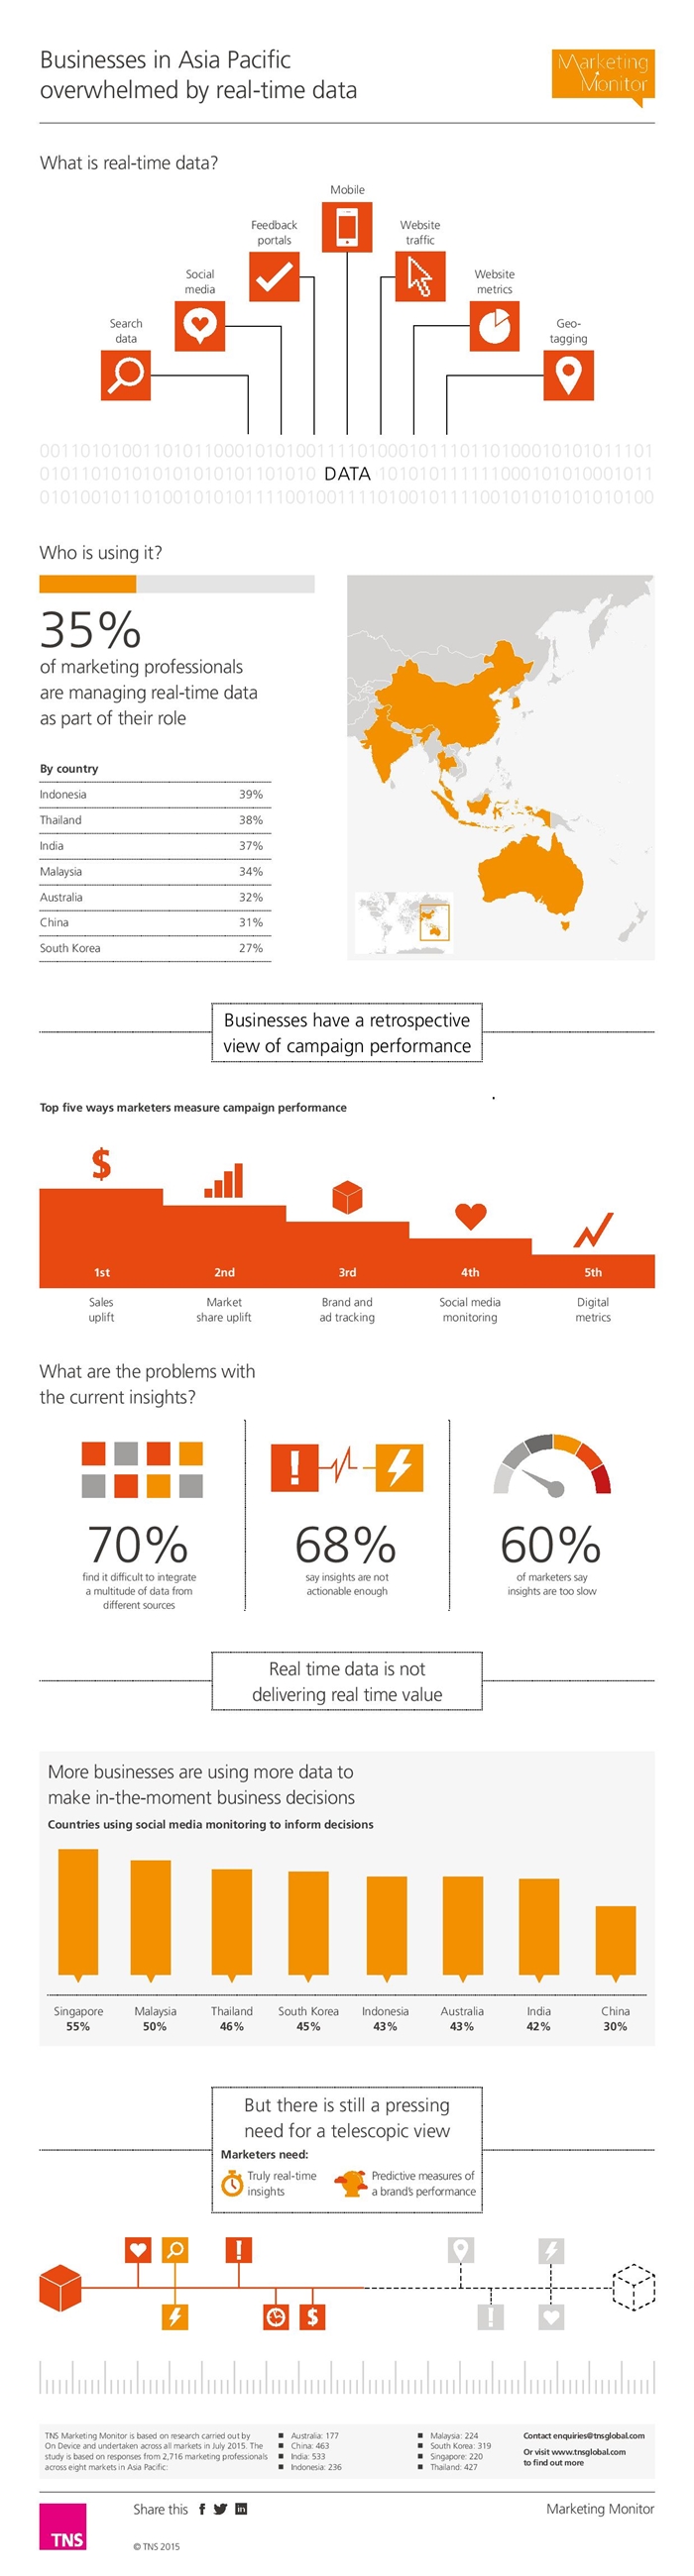 TNS_marketing_monitor_infographic-page-001-700